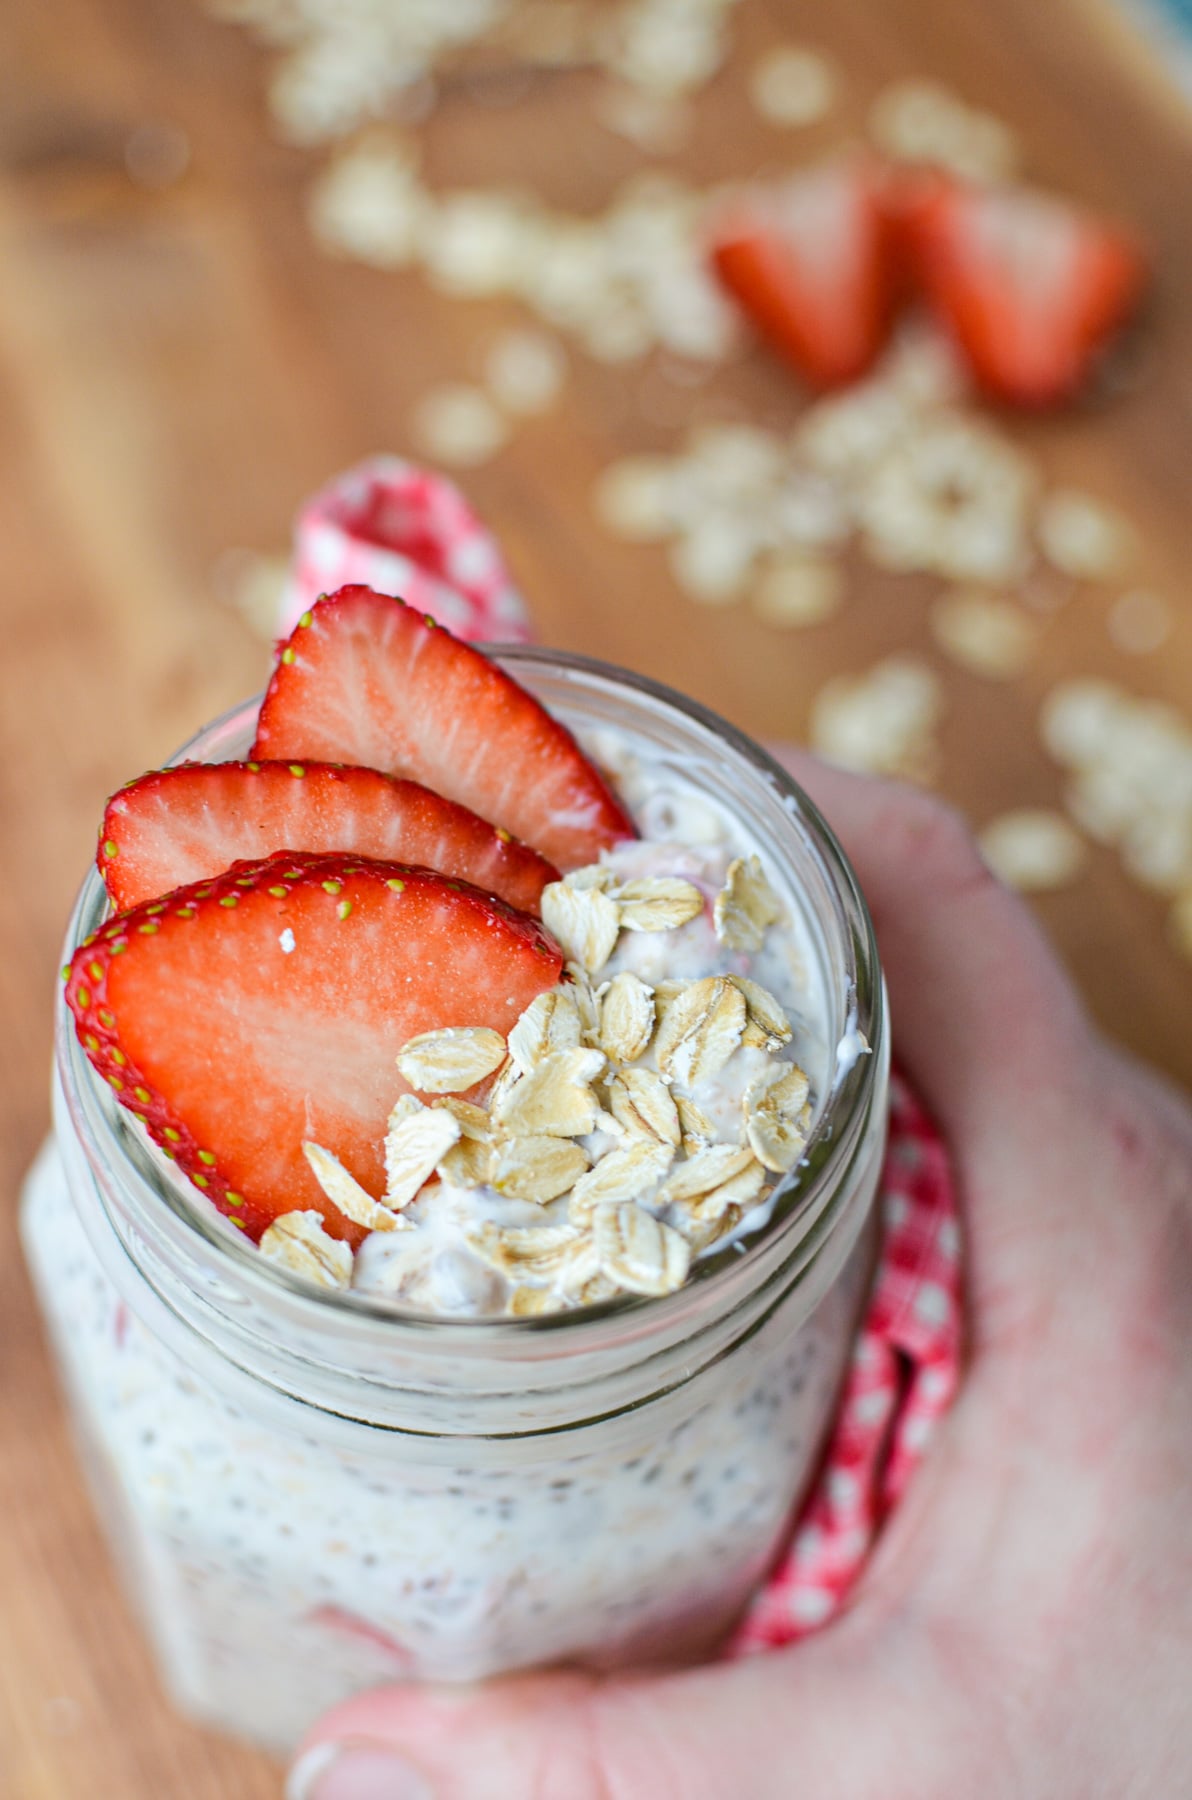 A hand grabbing a jar of kefir overnight oats garnished with strawberries.